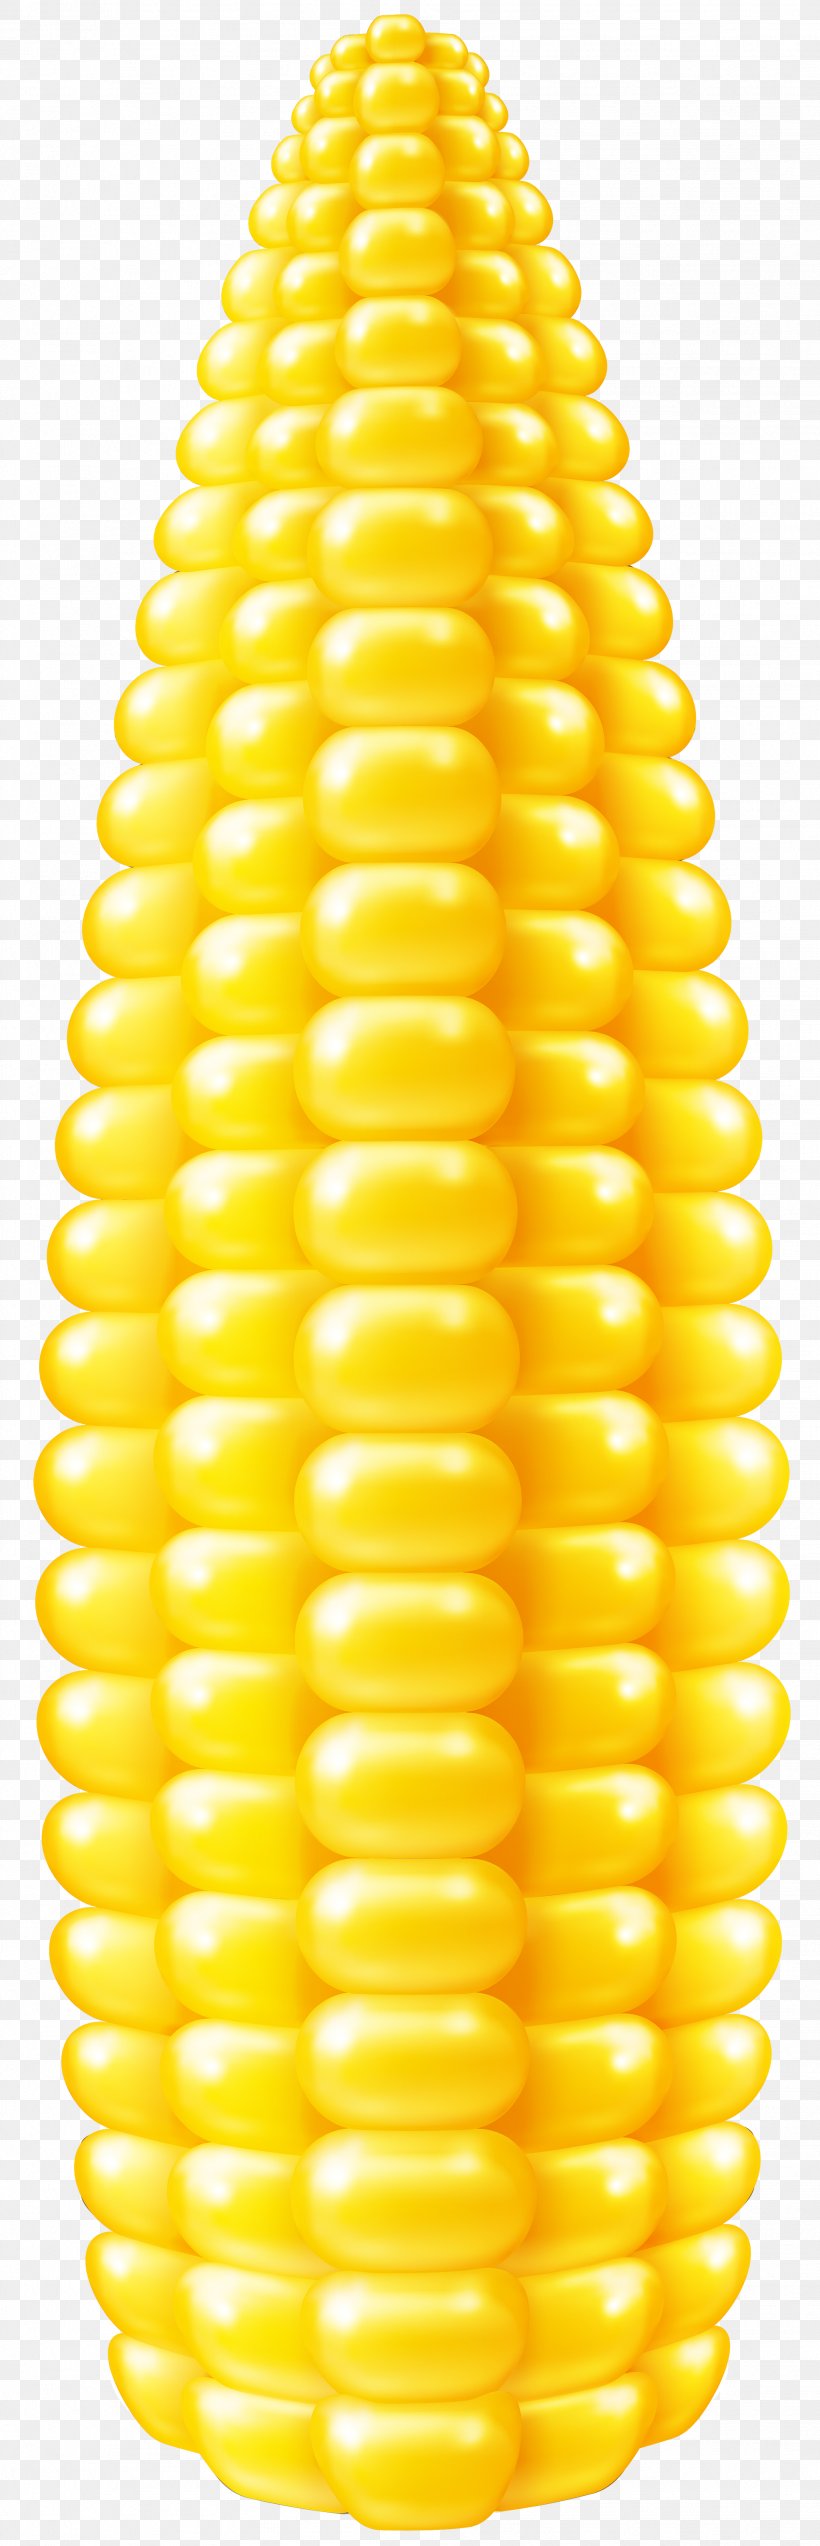 Corn On The Cob Drawing Maize Clip Art, PNG, 1932x6000px, Corn On The Cob, Commodity, Corn Kernel, Drawing, Ear Download Free